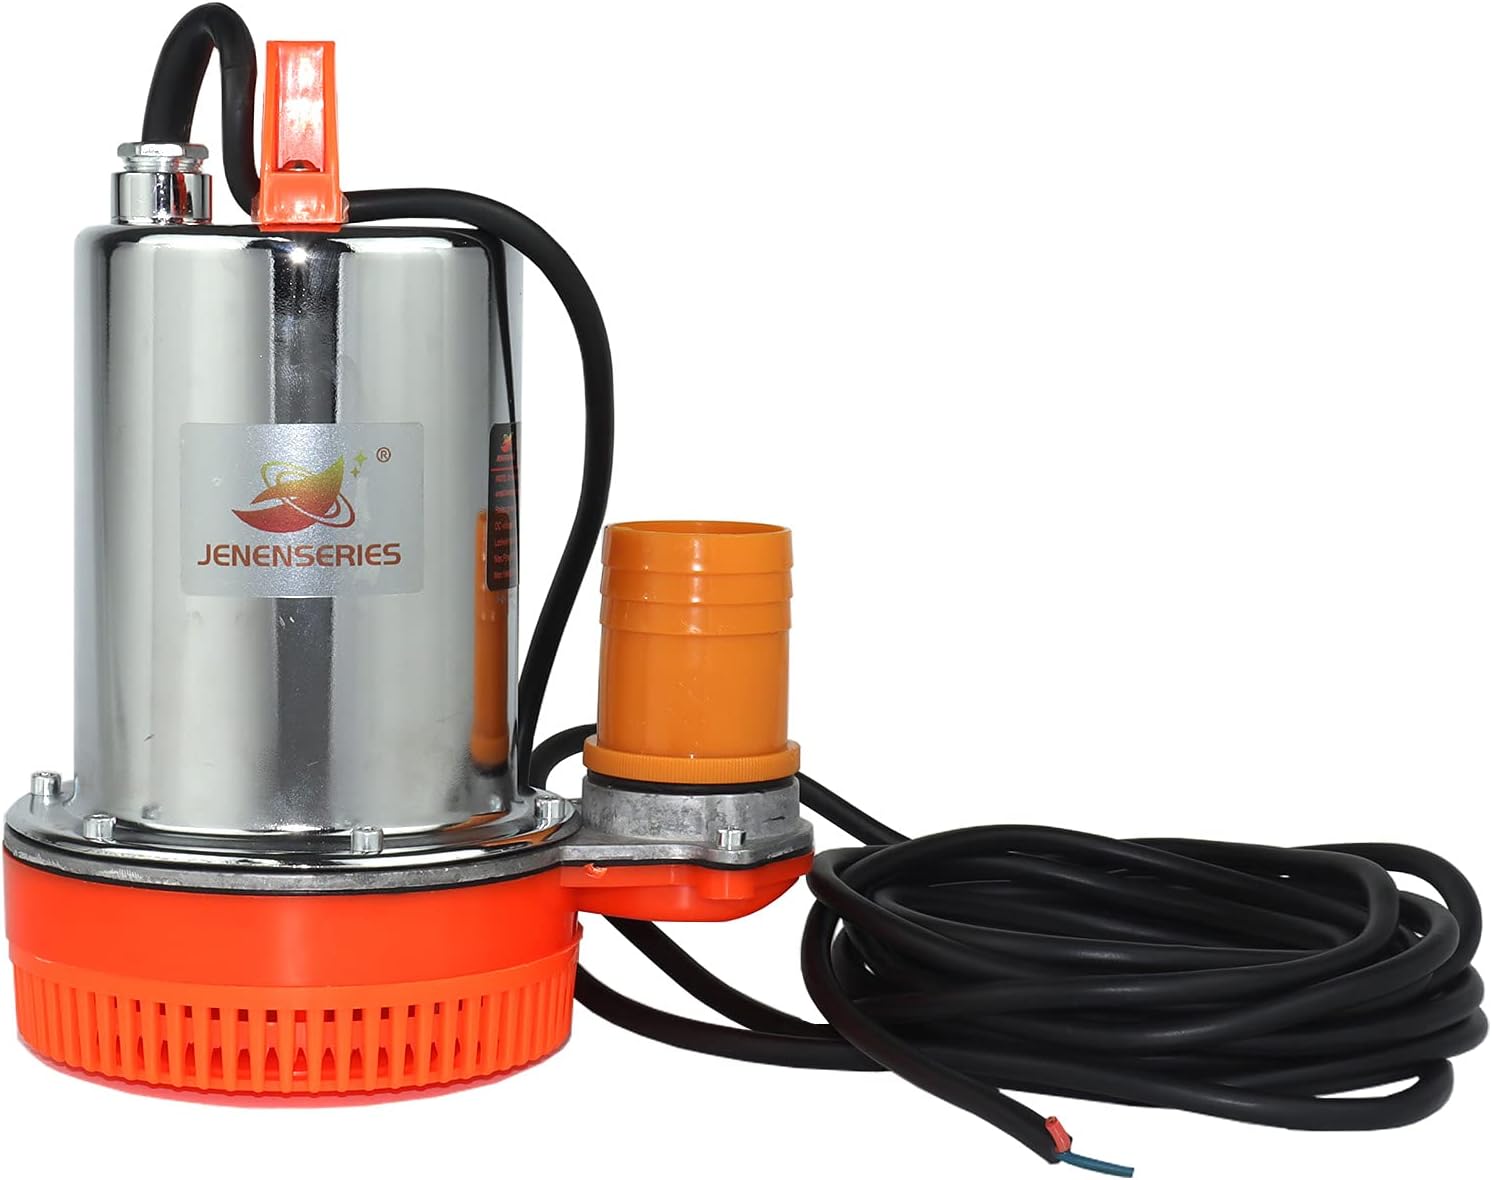 JENENSERIES Pump 300W DC 12V Solar Water Pumps, Max head 39ft,22GPM Flow，2 inch Solar deep well submersible Pumps kits for ranch or farm